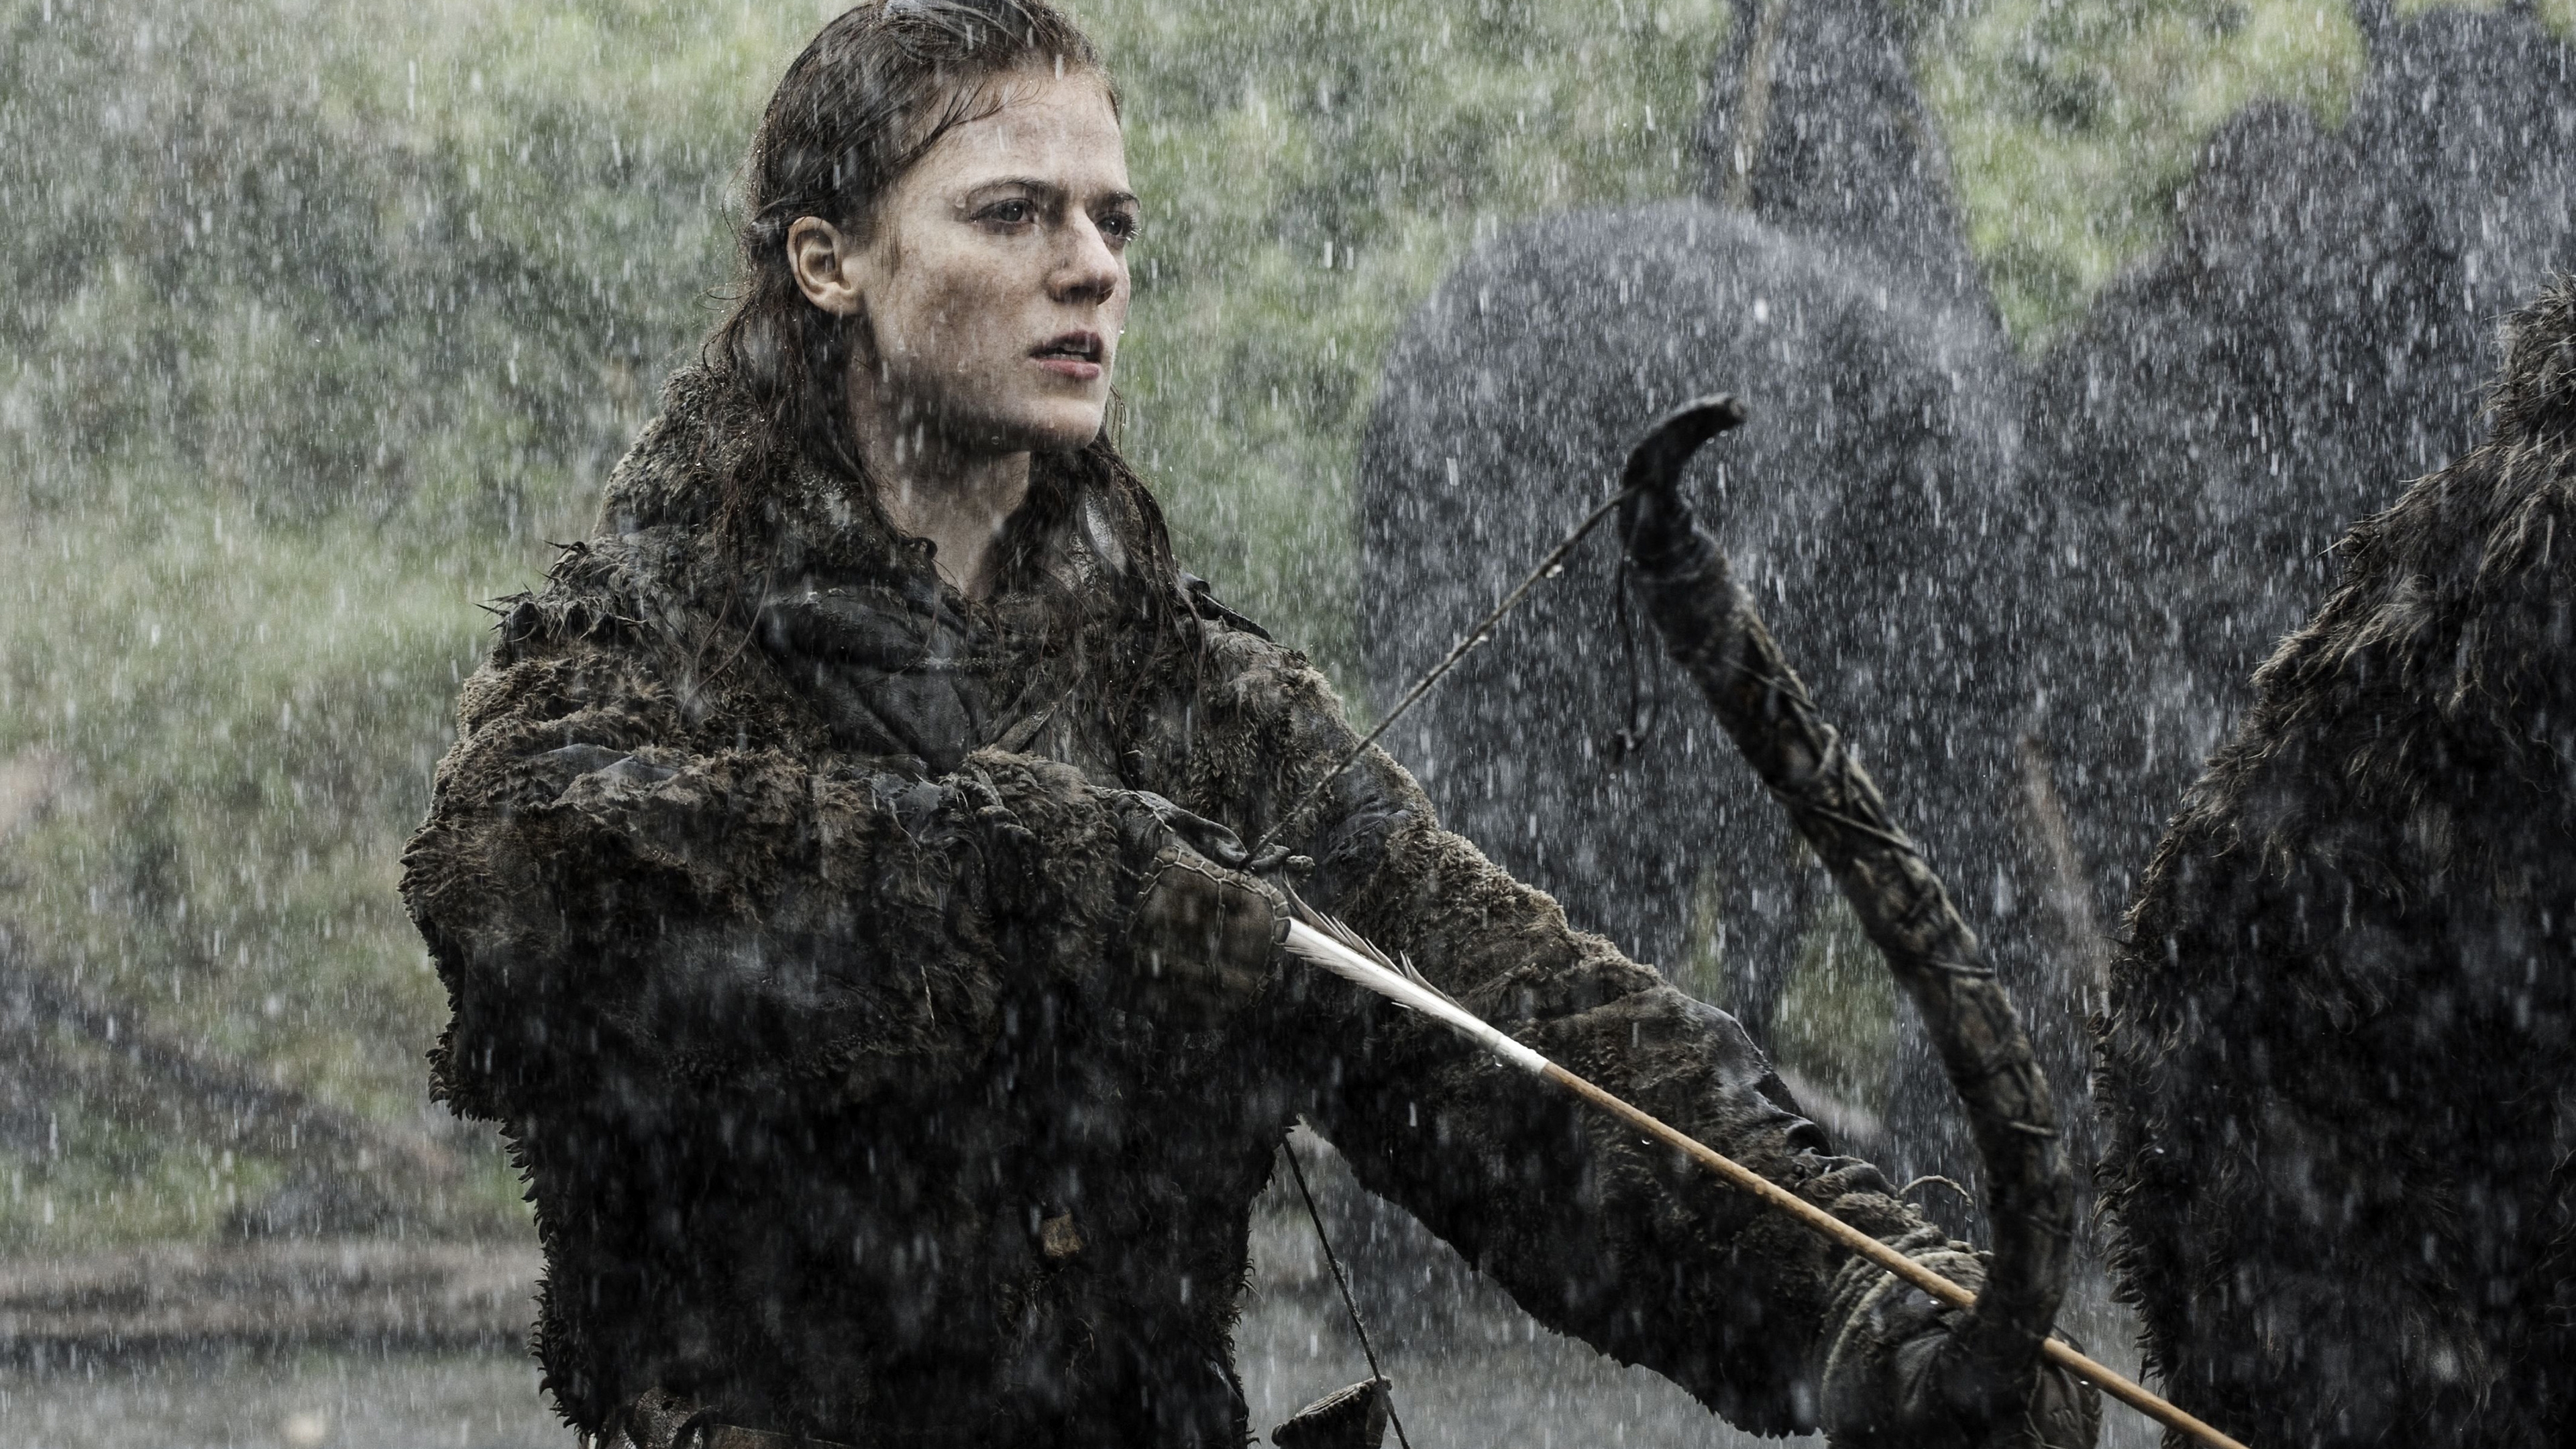 Ygritte from Game of Thrones for 3840 x 2160 Ultra HD resolution